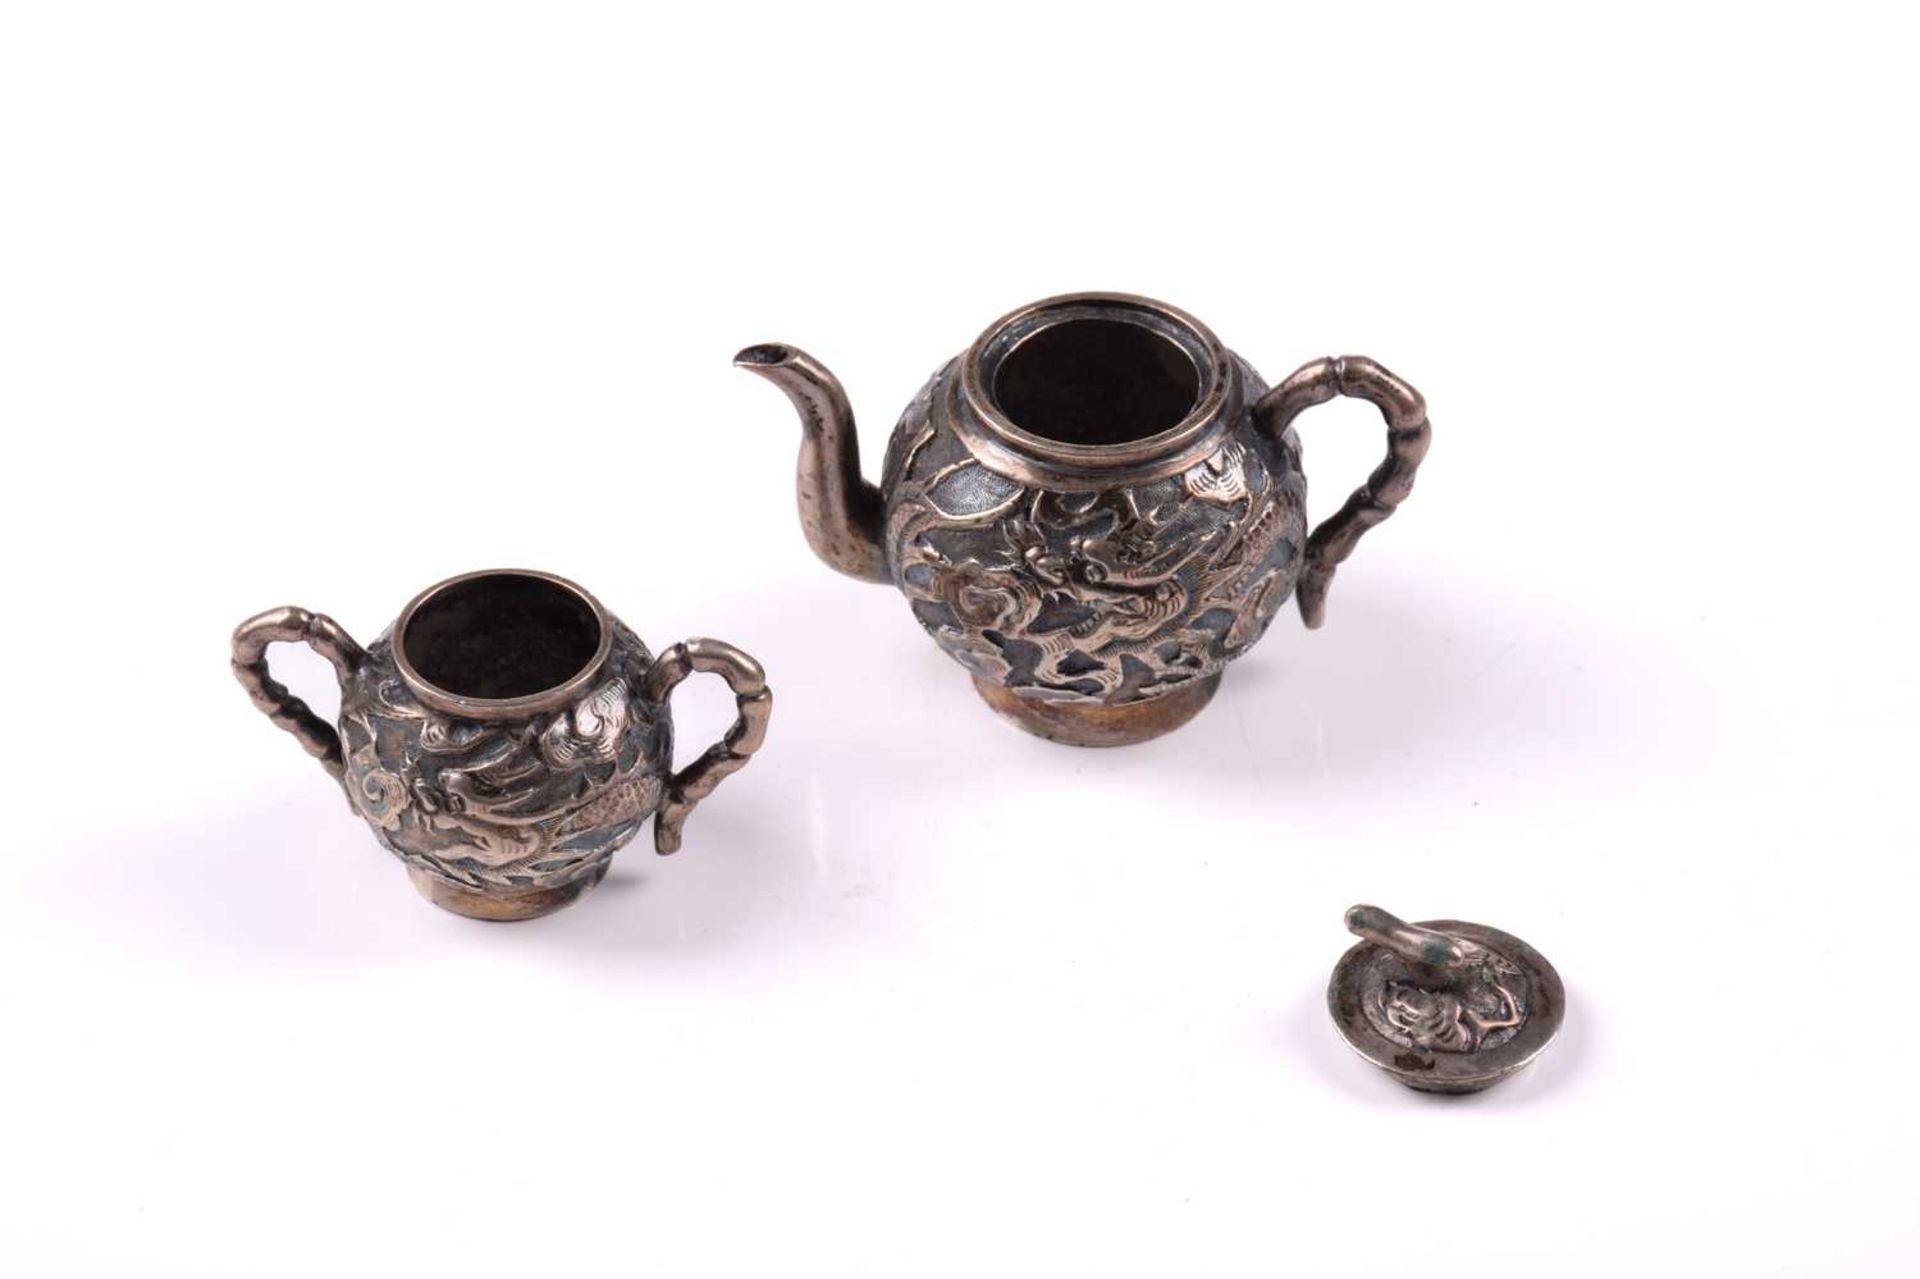 A Chinese miniature silver teapot and sugar bowl by Tuck Chang, each piece decorated with a dragon - Image 6 of 7